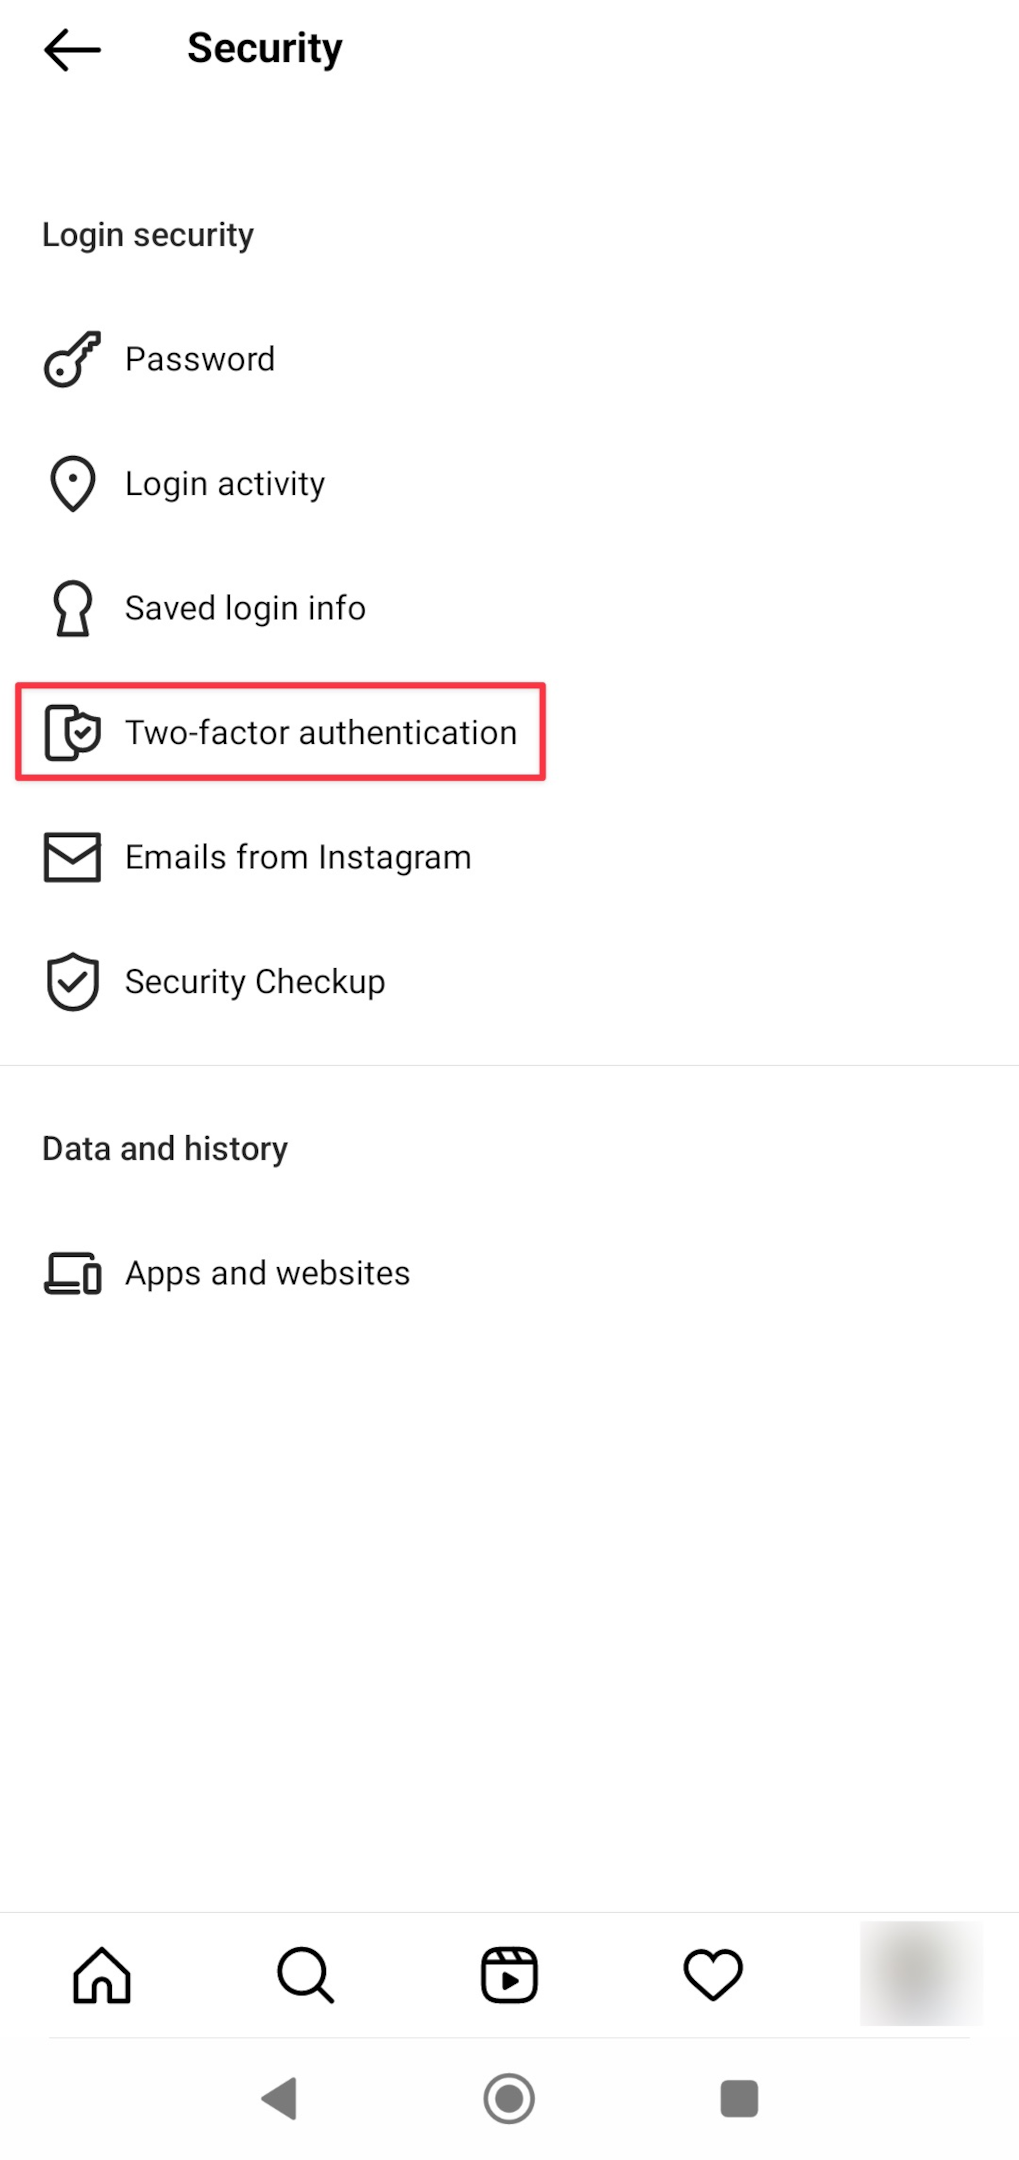 Remote.tools shows two-factor authentication settings for your Instagram profile